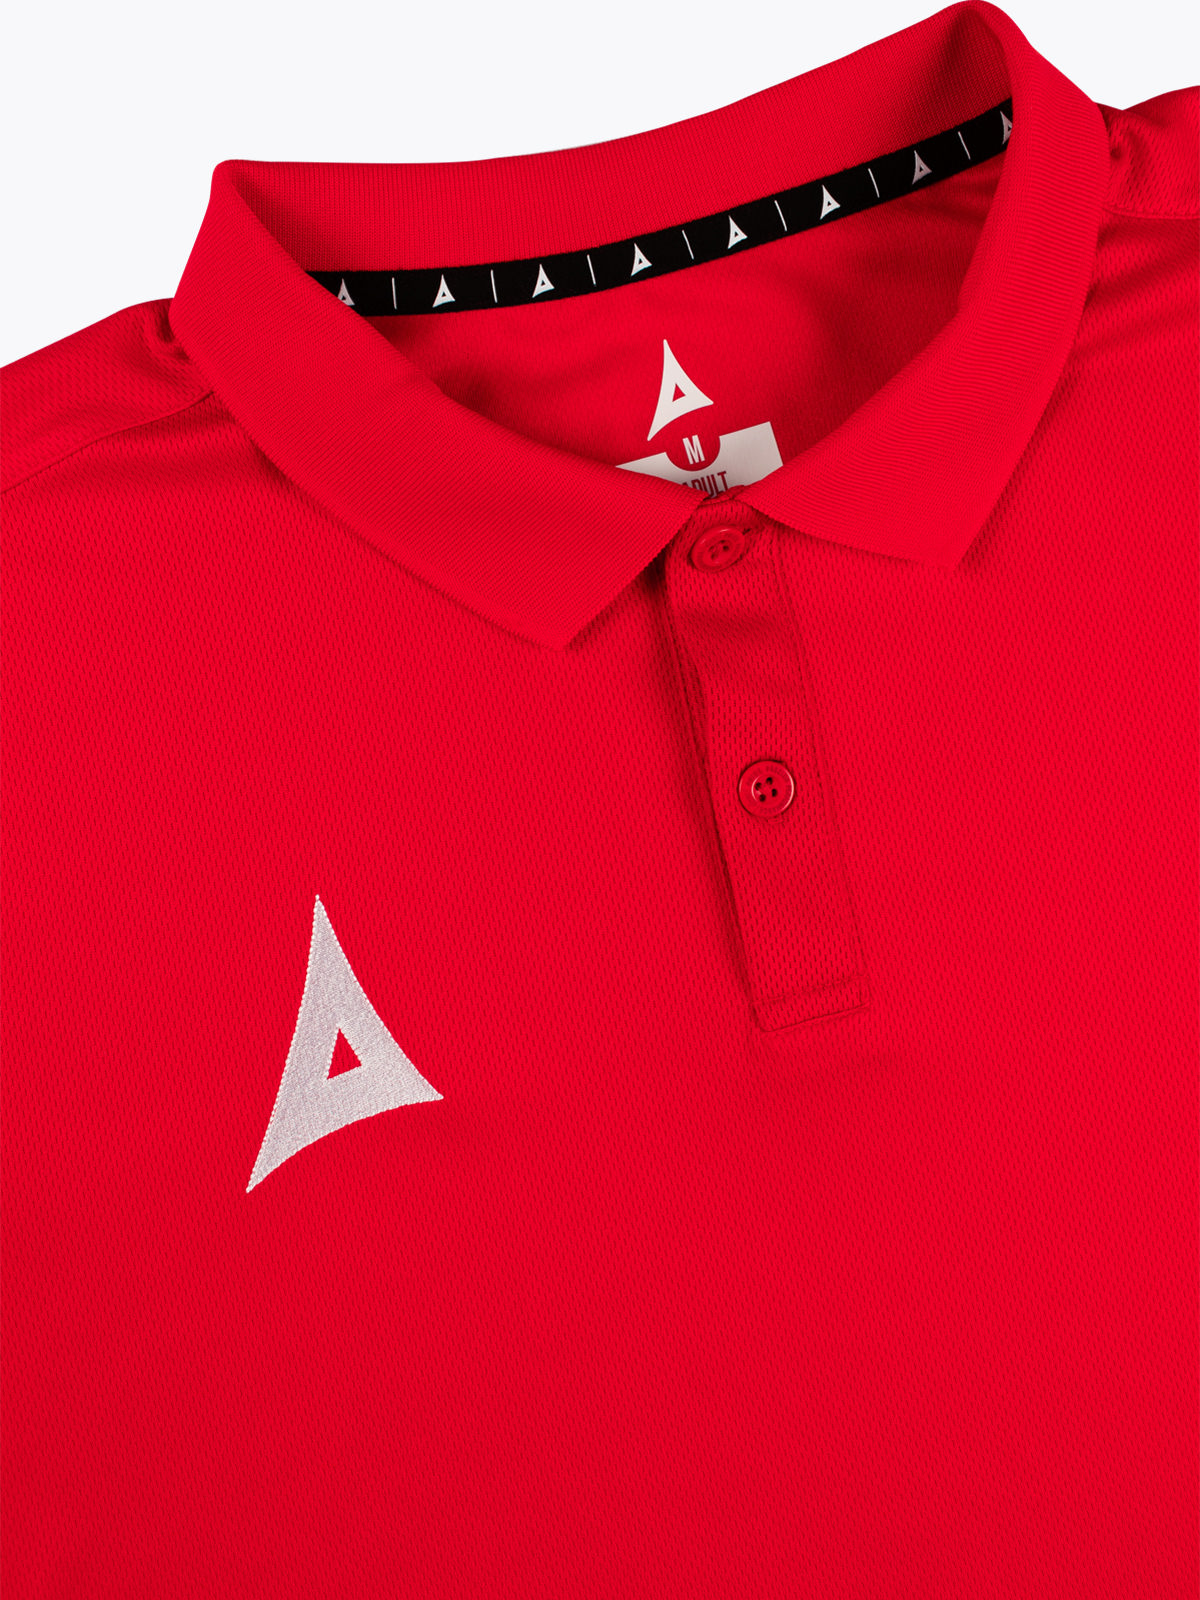 picture of focus 2 tech polo - red